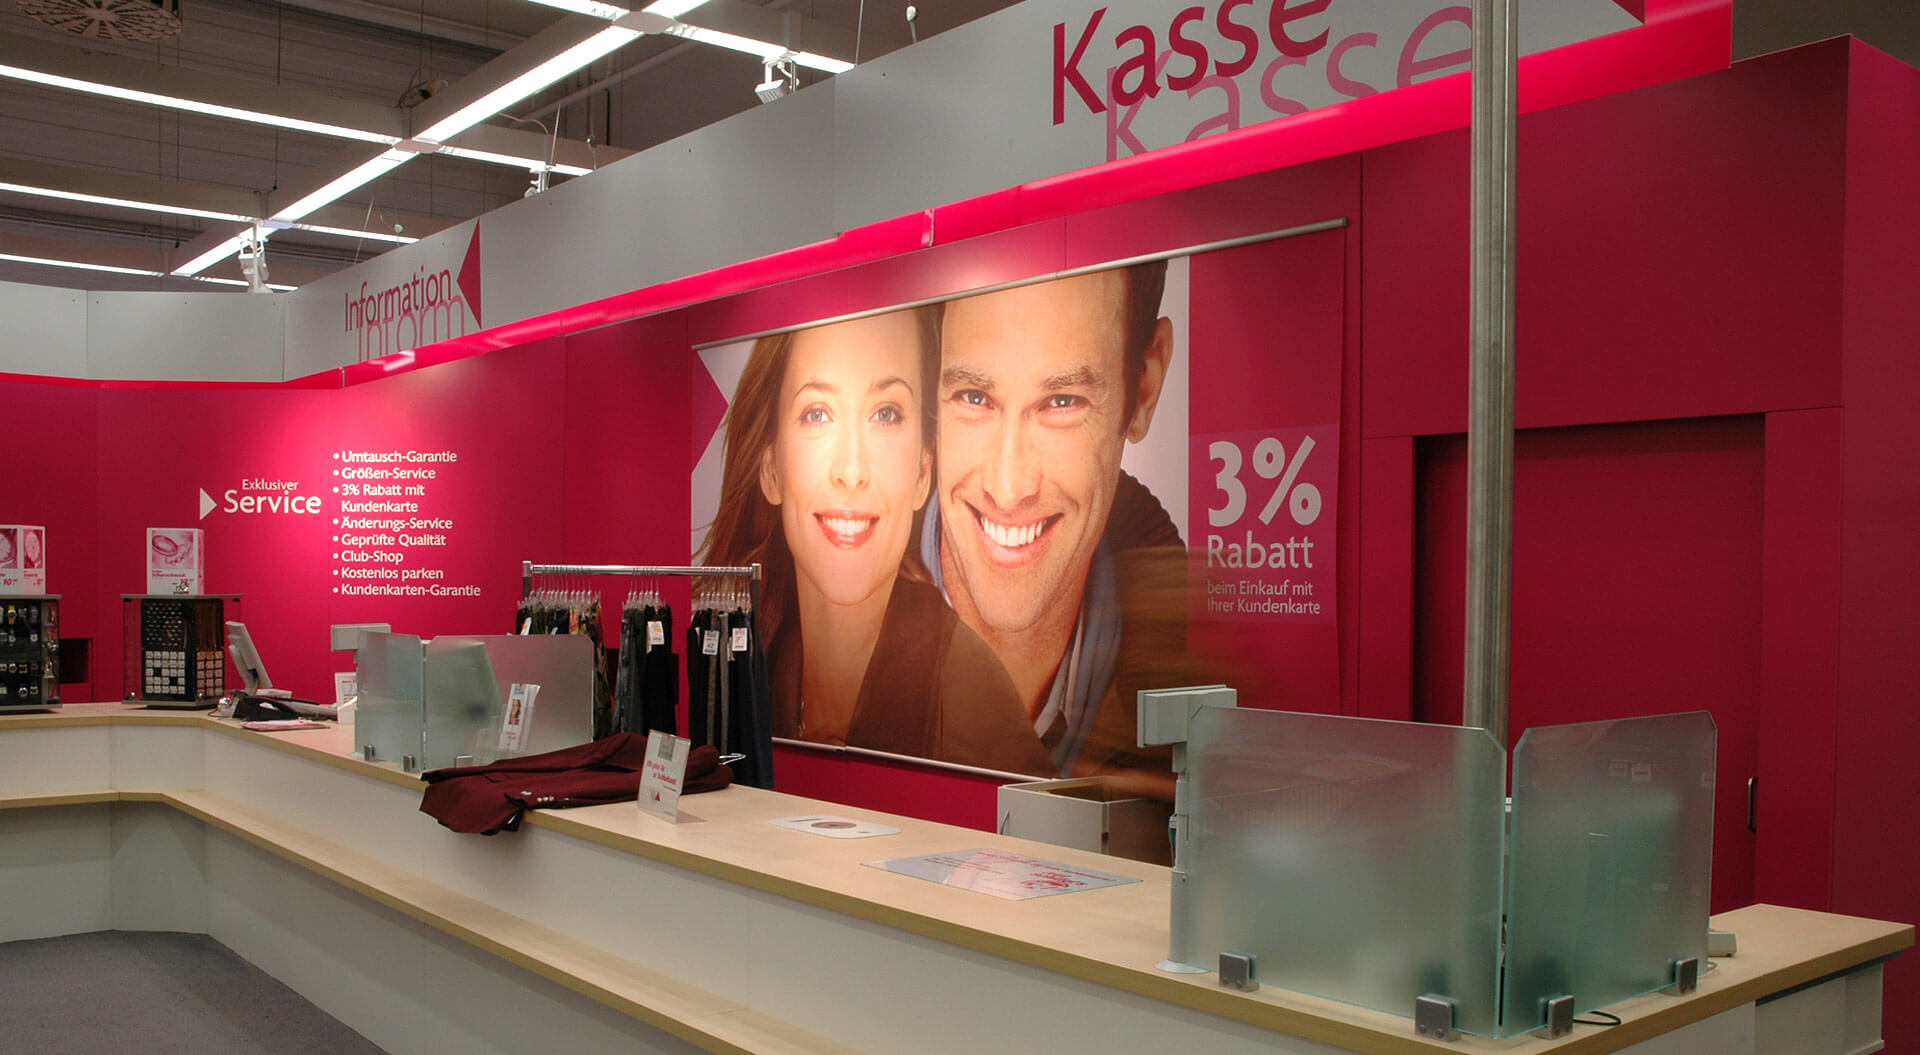  Adler Fashion Store Germany retail store interior design and department branding for cashier - check out